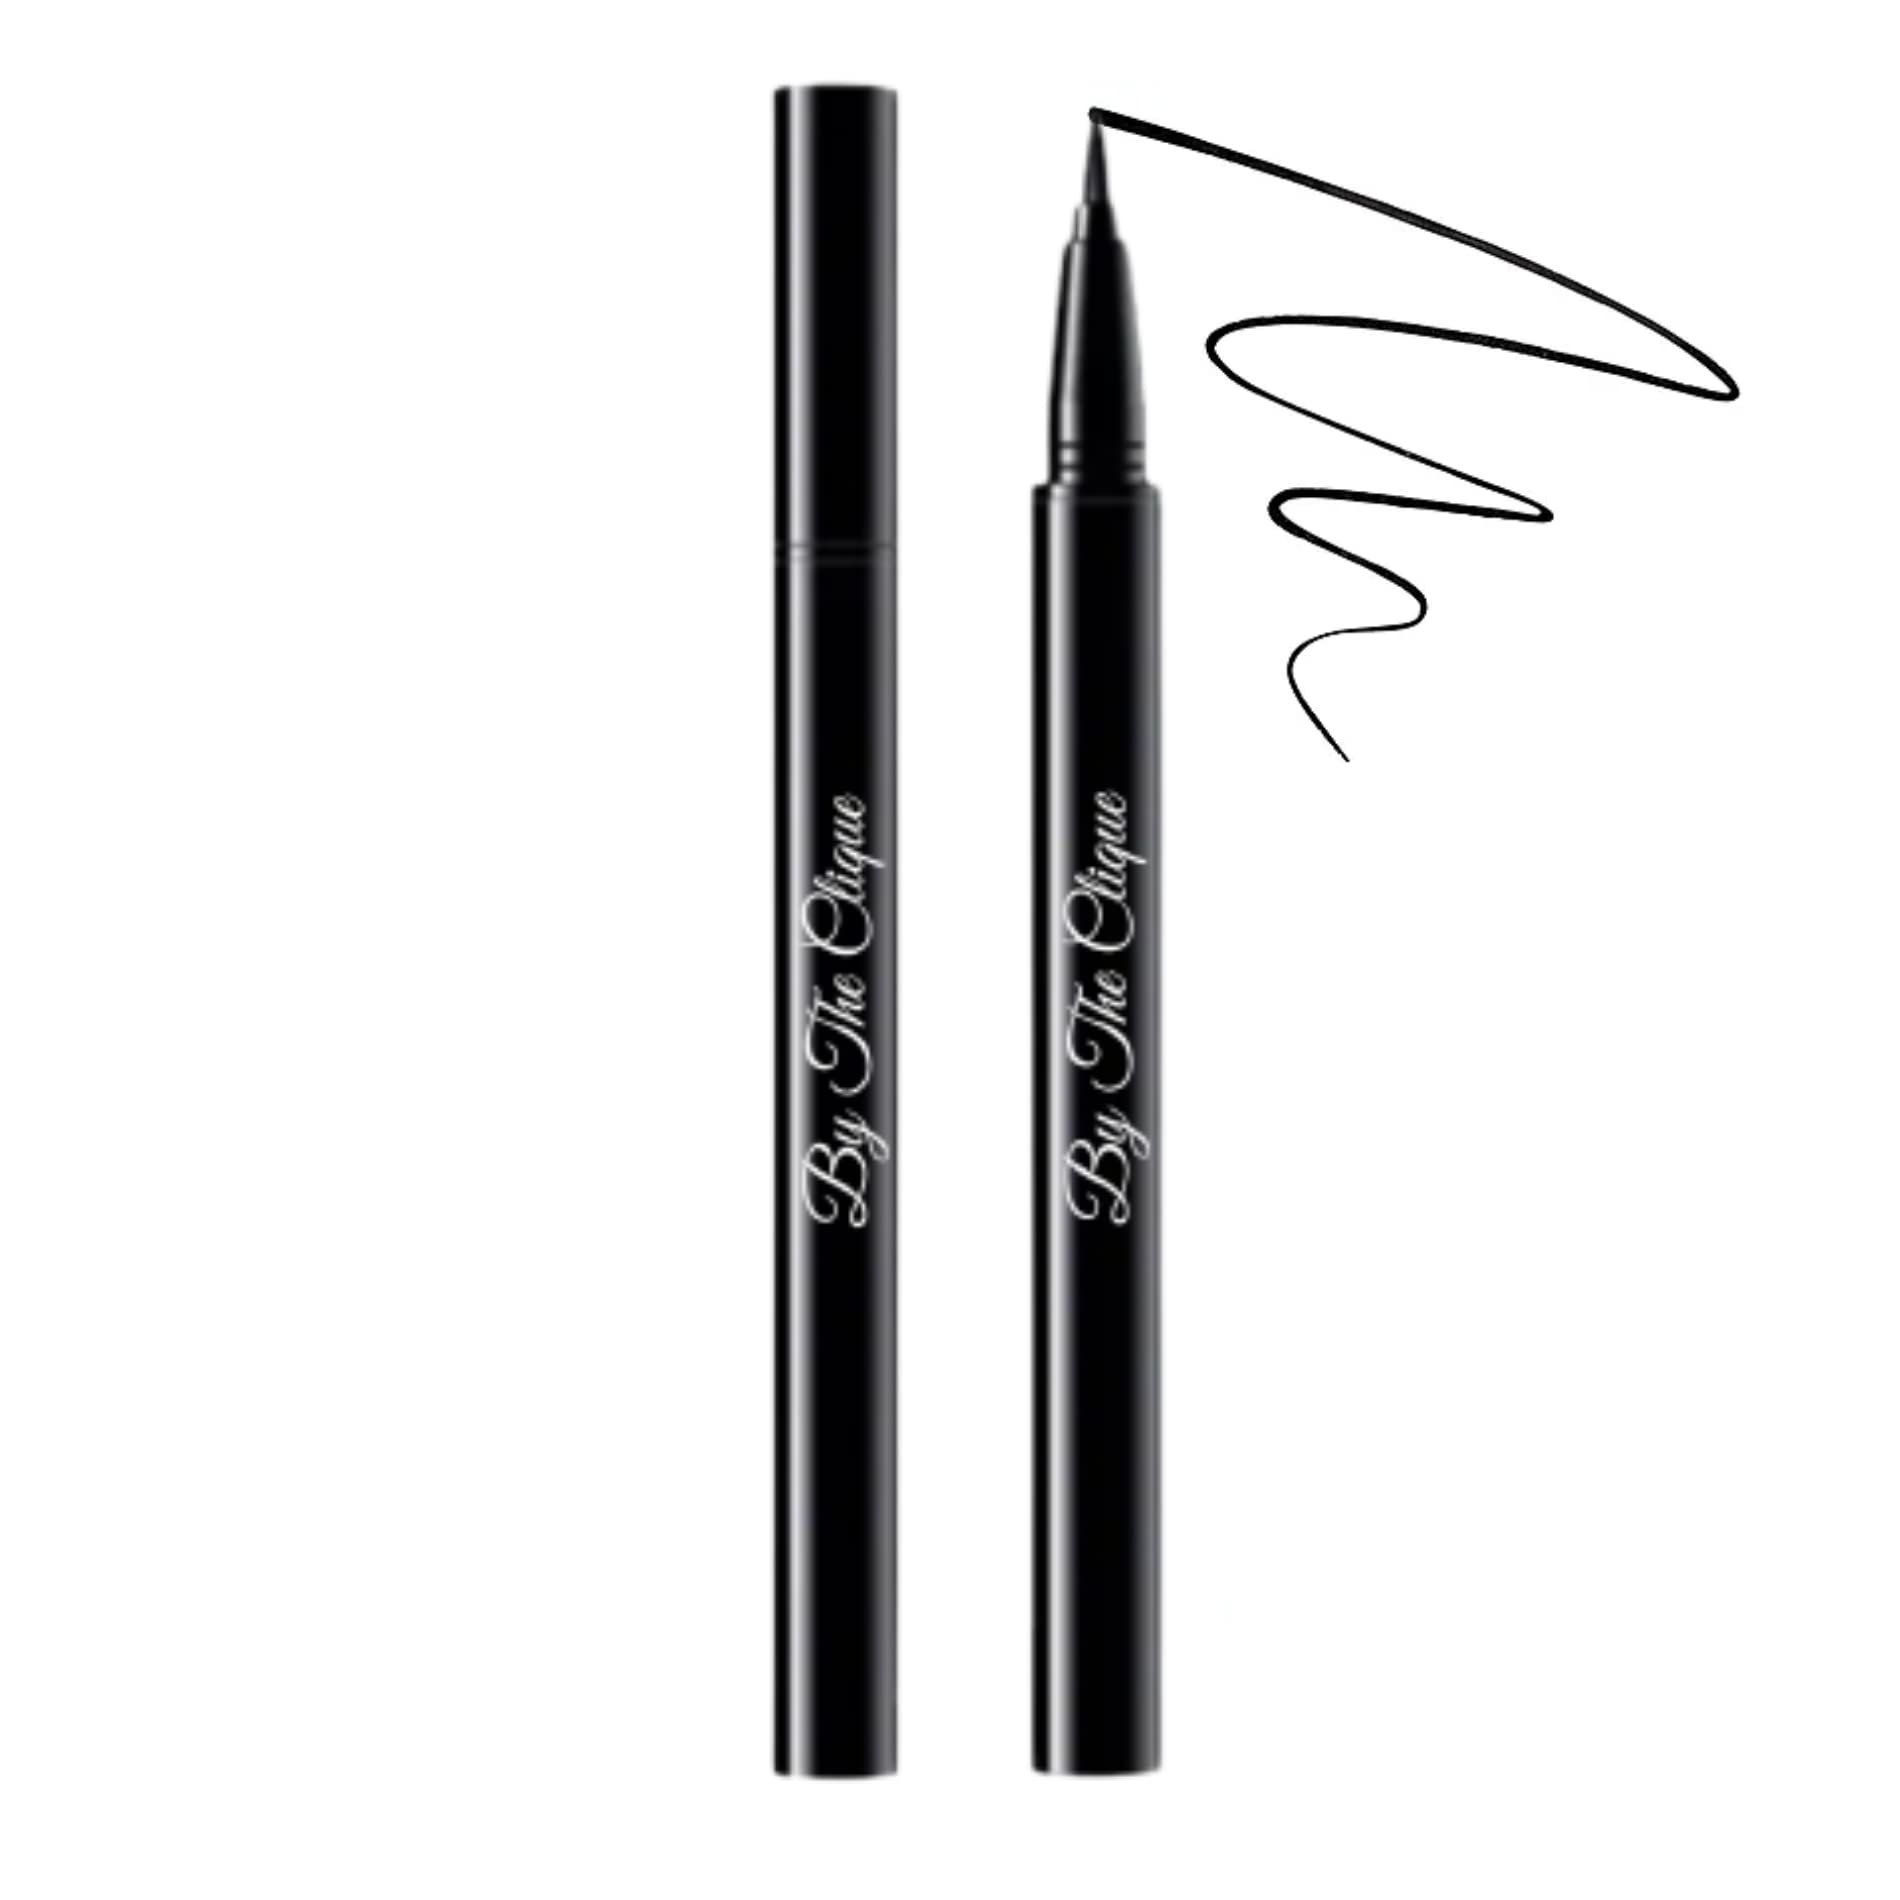 By The Clique Premmium Black Lengthening Mascara and Liquid Eyeliner | Smudge proof - All Day Stay